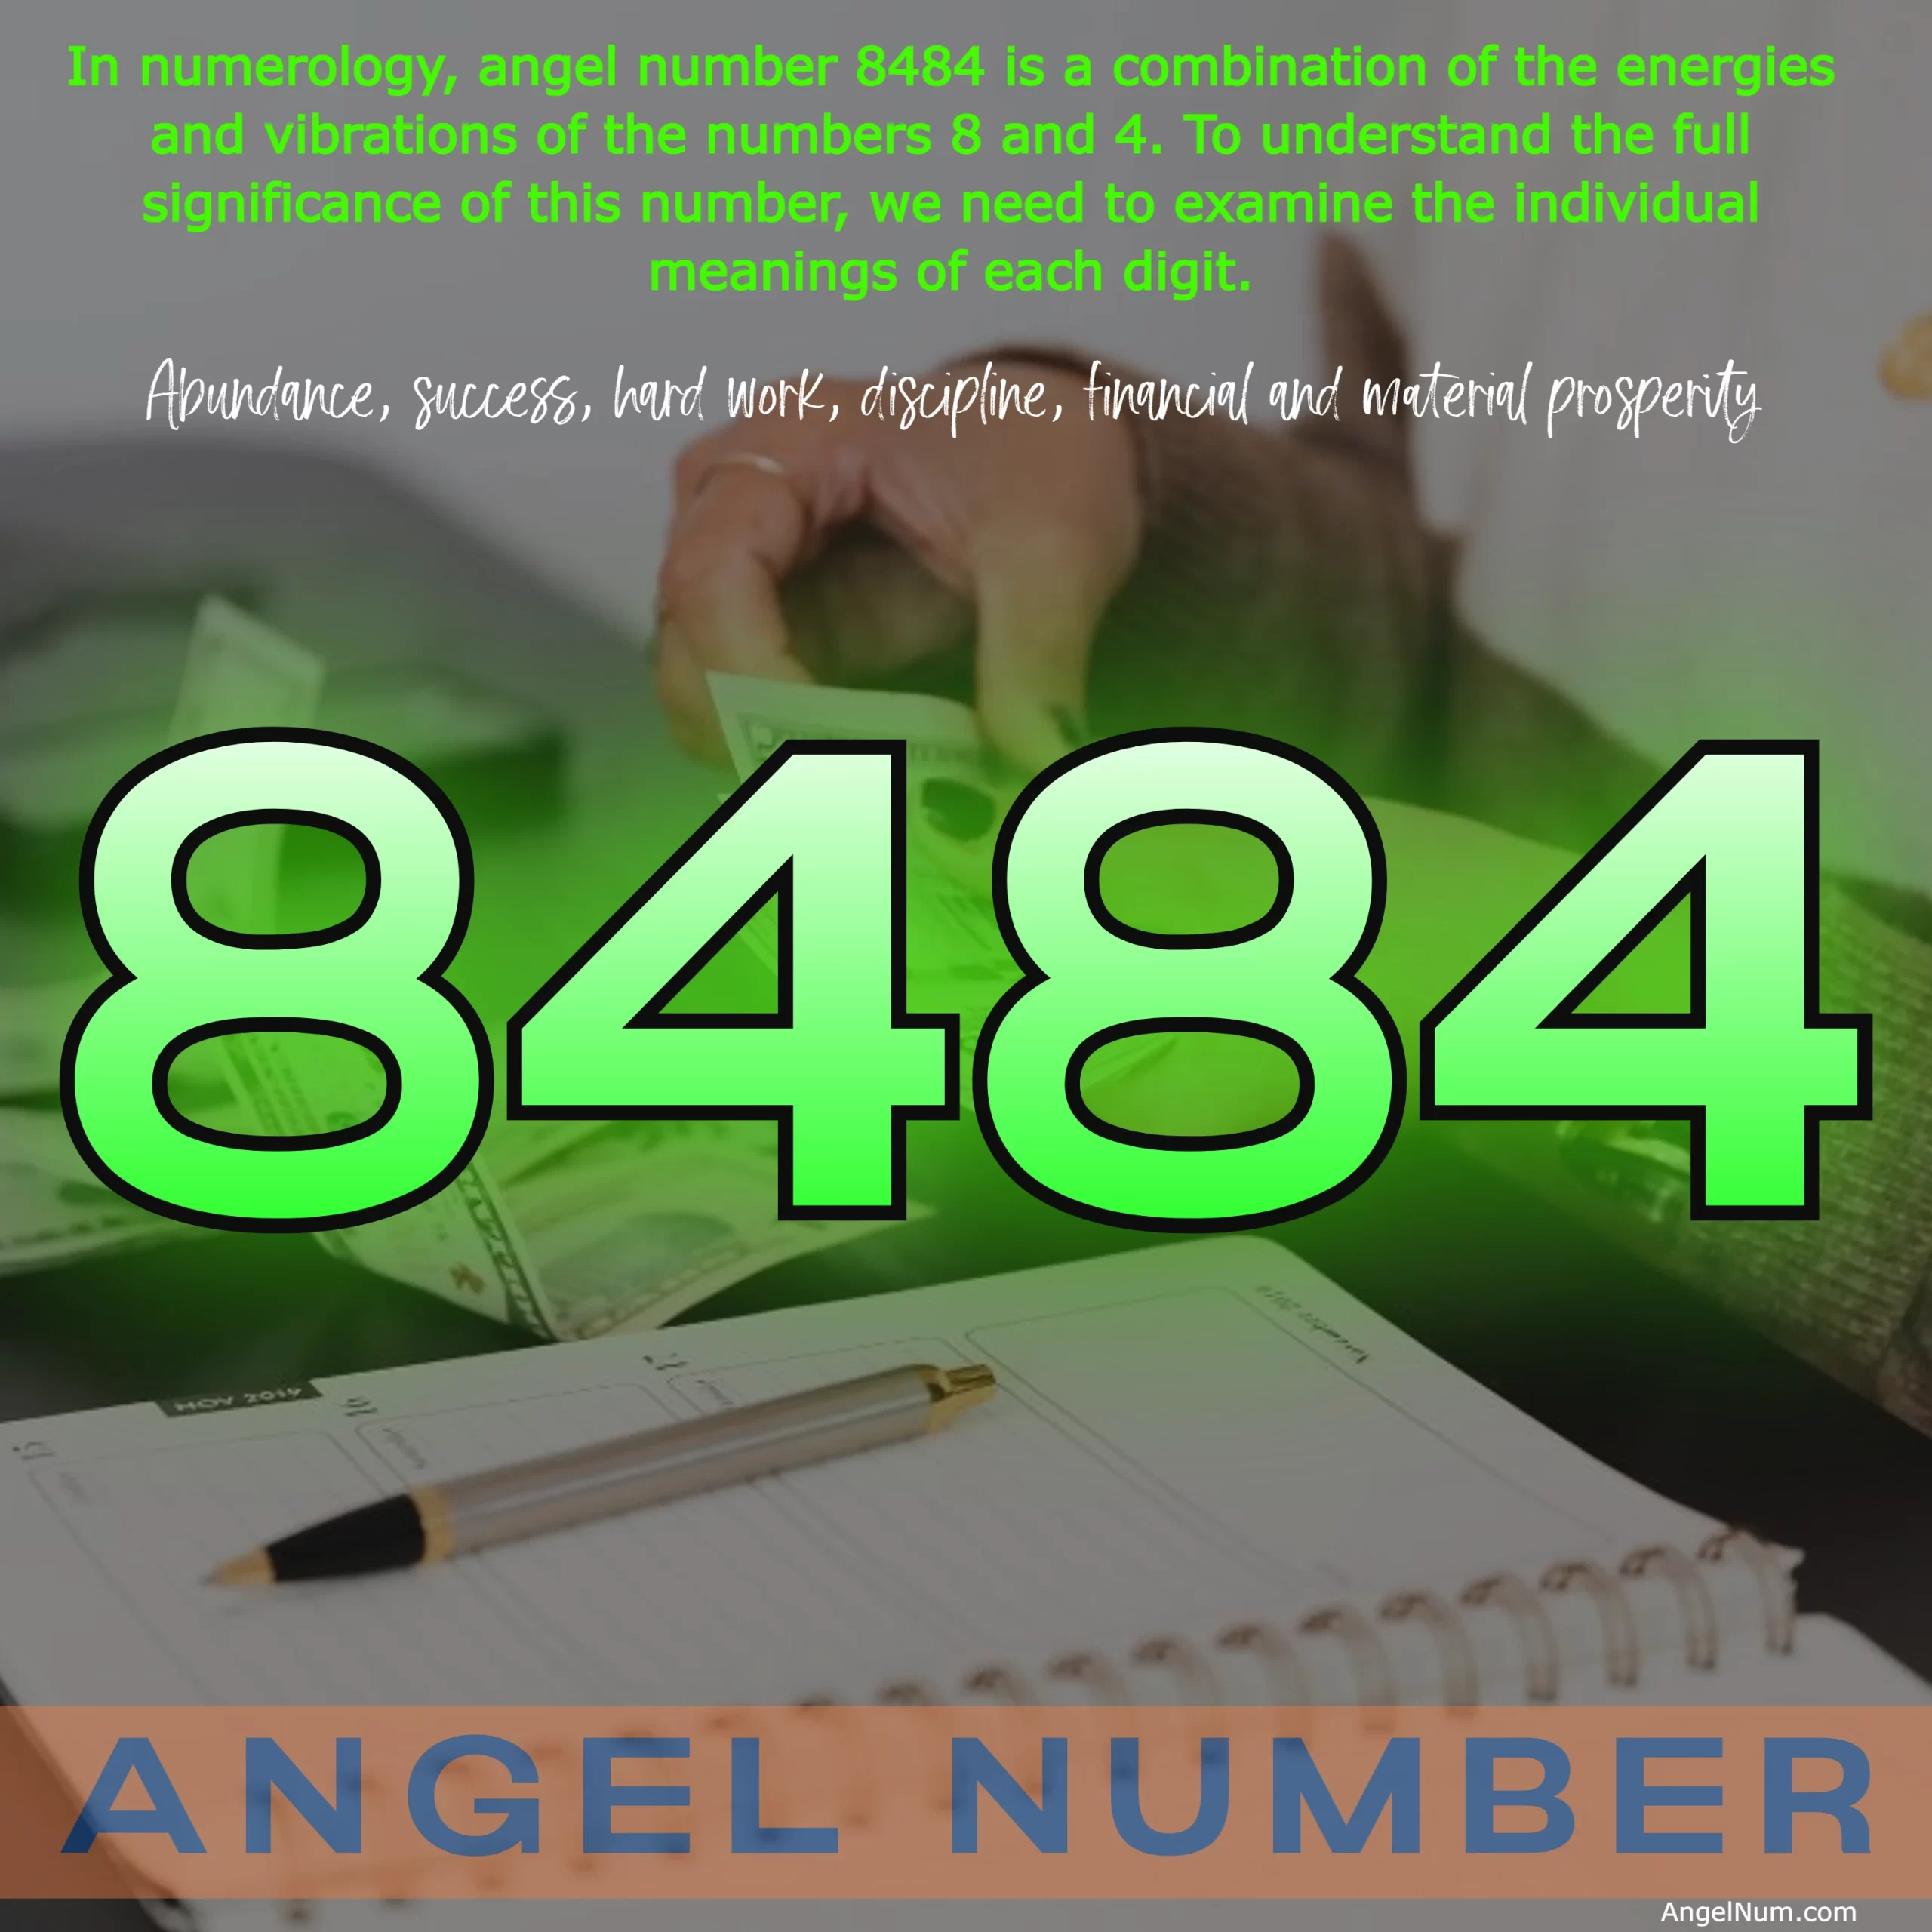 Angel Number 8484: Discover the Meaning and Significance